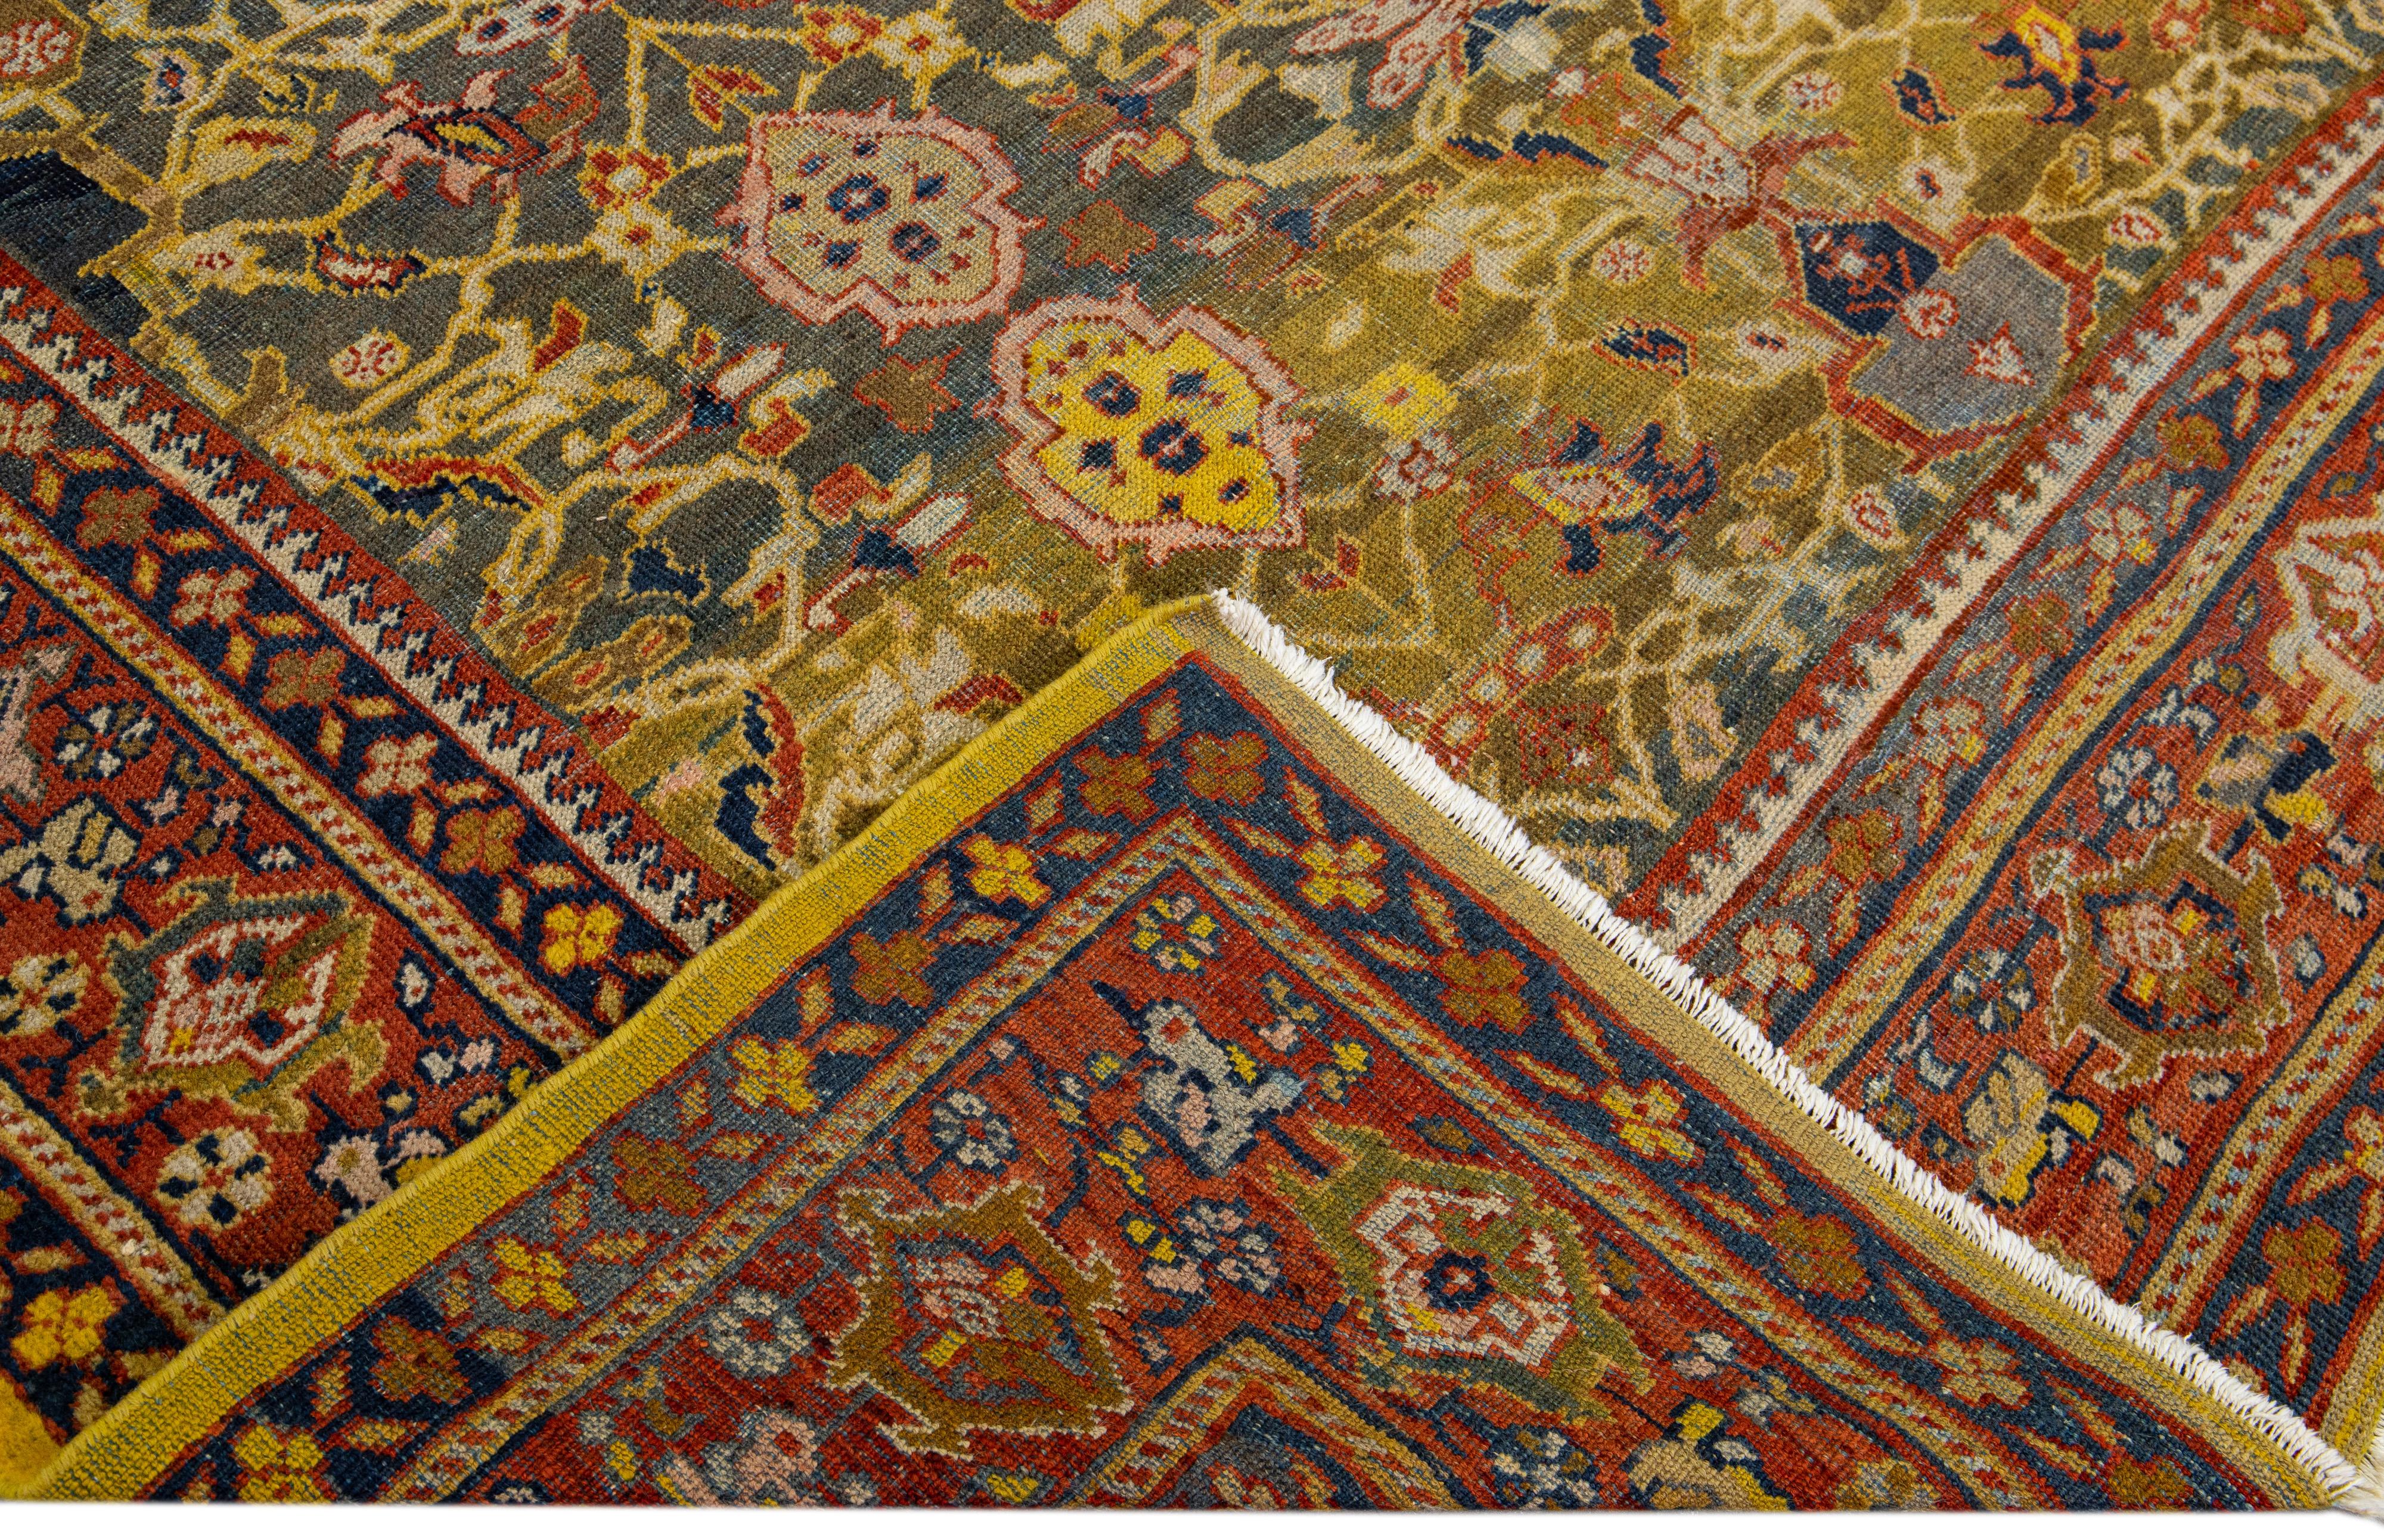 Beautiful antique Persian Sultanabad hand-knotted wool rug with a gray field. This piece has a rusted designed frame and yellow and brown accents in a gorgeous all-over floral pattern design.

This rug measures: 8'7